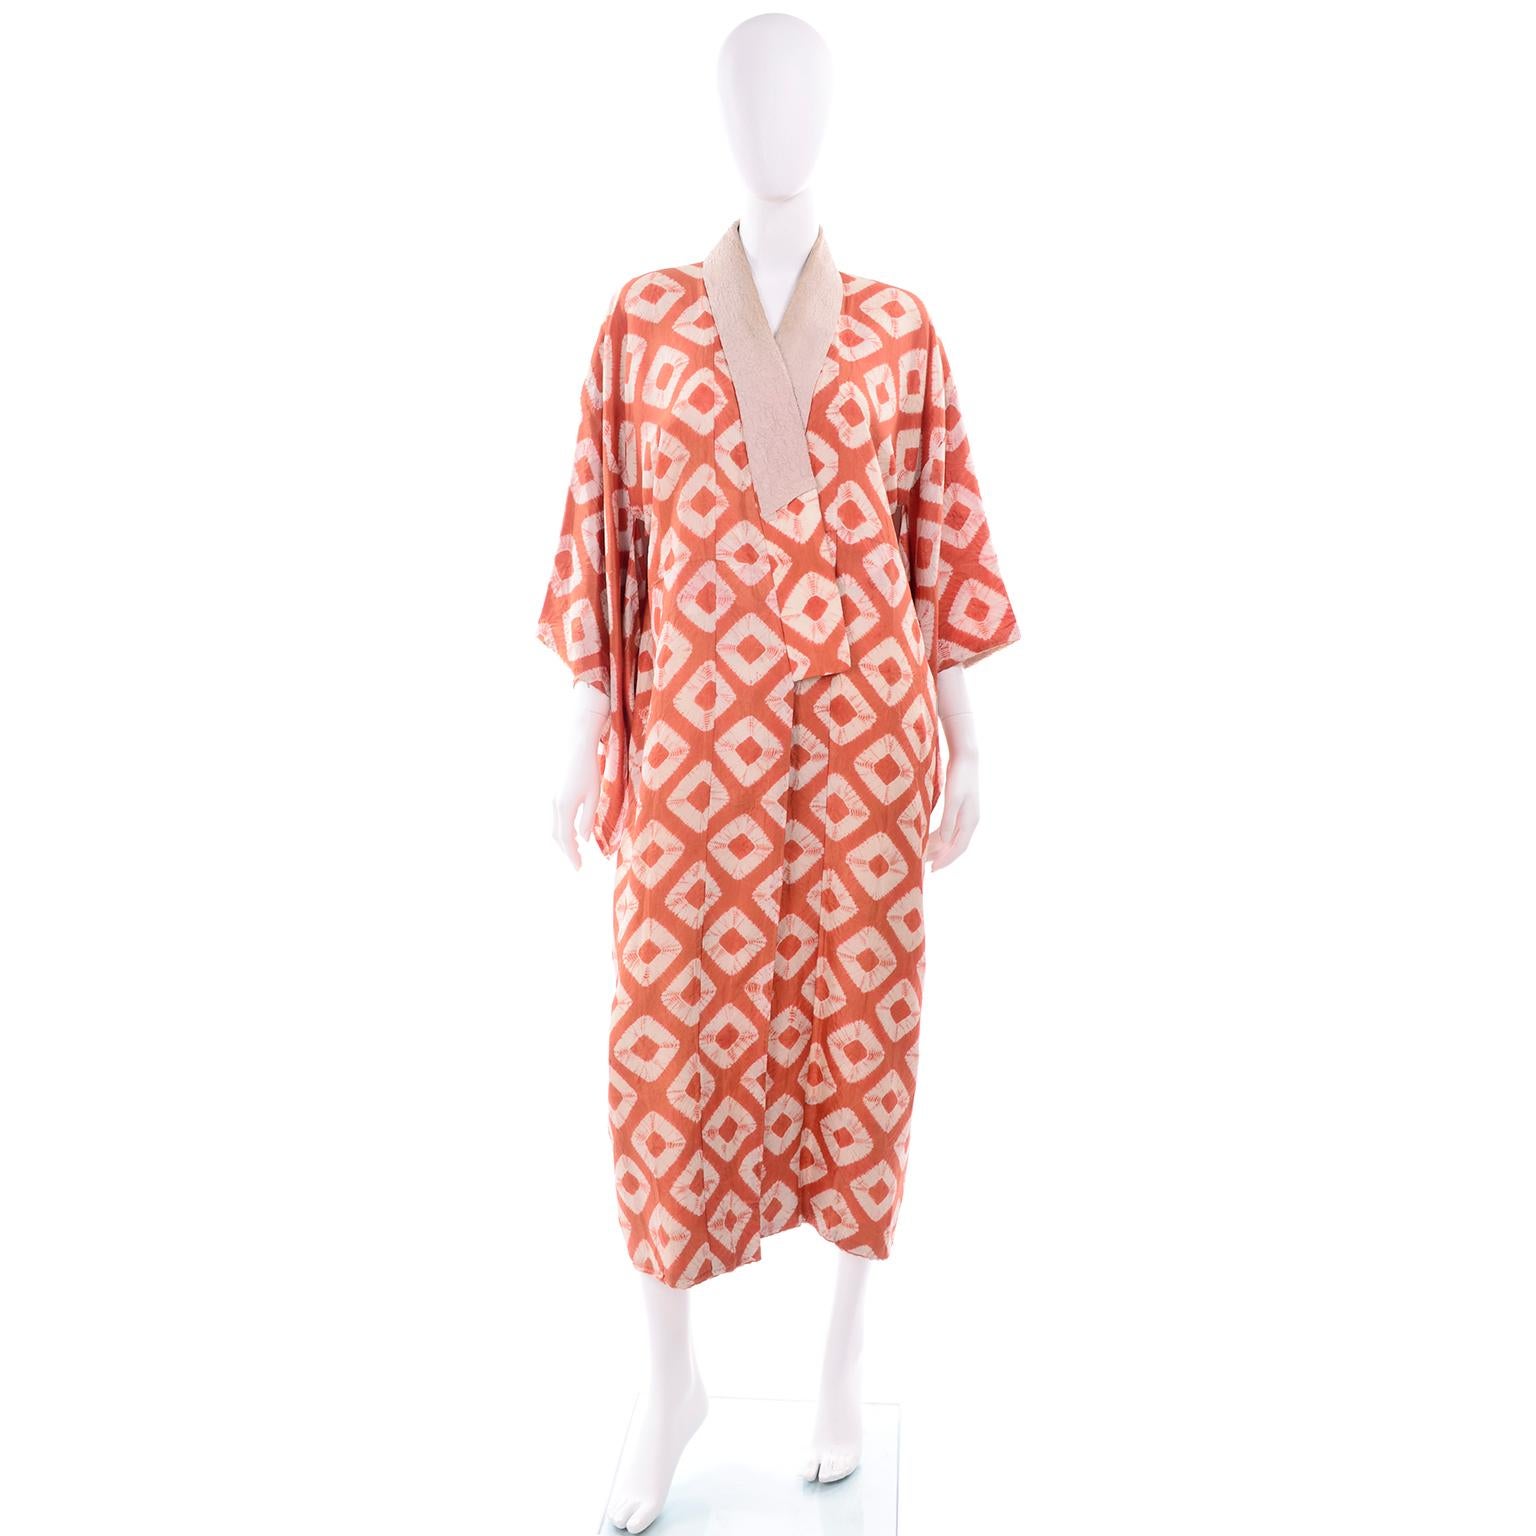 We love Japanese kimonos and this one is so lovely in an orange and cream shibori silk geometric pattern and tan collar. This incredible kimono is hand dyed and can be worn with a belt as a coat or at home as a lounging robe.  The silk is ultra fine